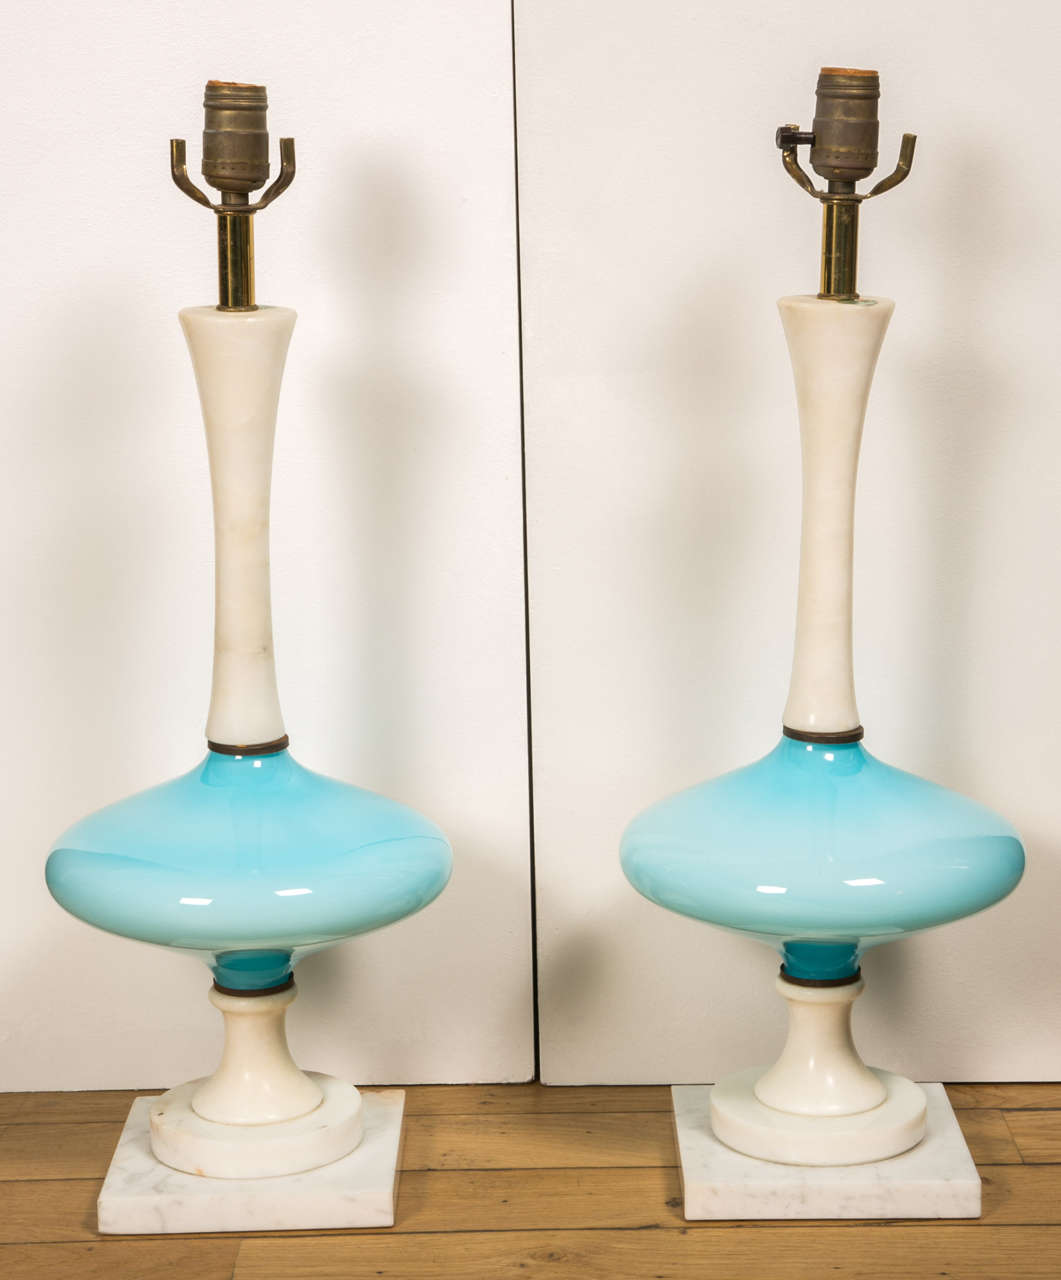 Beautiful pair of italian lamps, circa 1970
White marbre of Carrare and beautiful turquoise color in glass
In good vintage condition. 

Electrification to do.